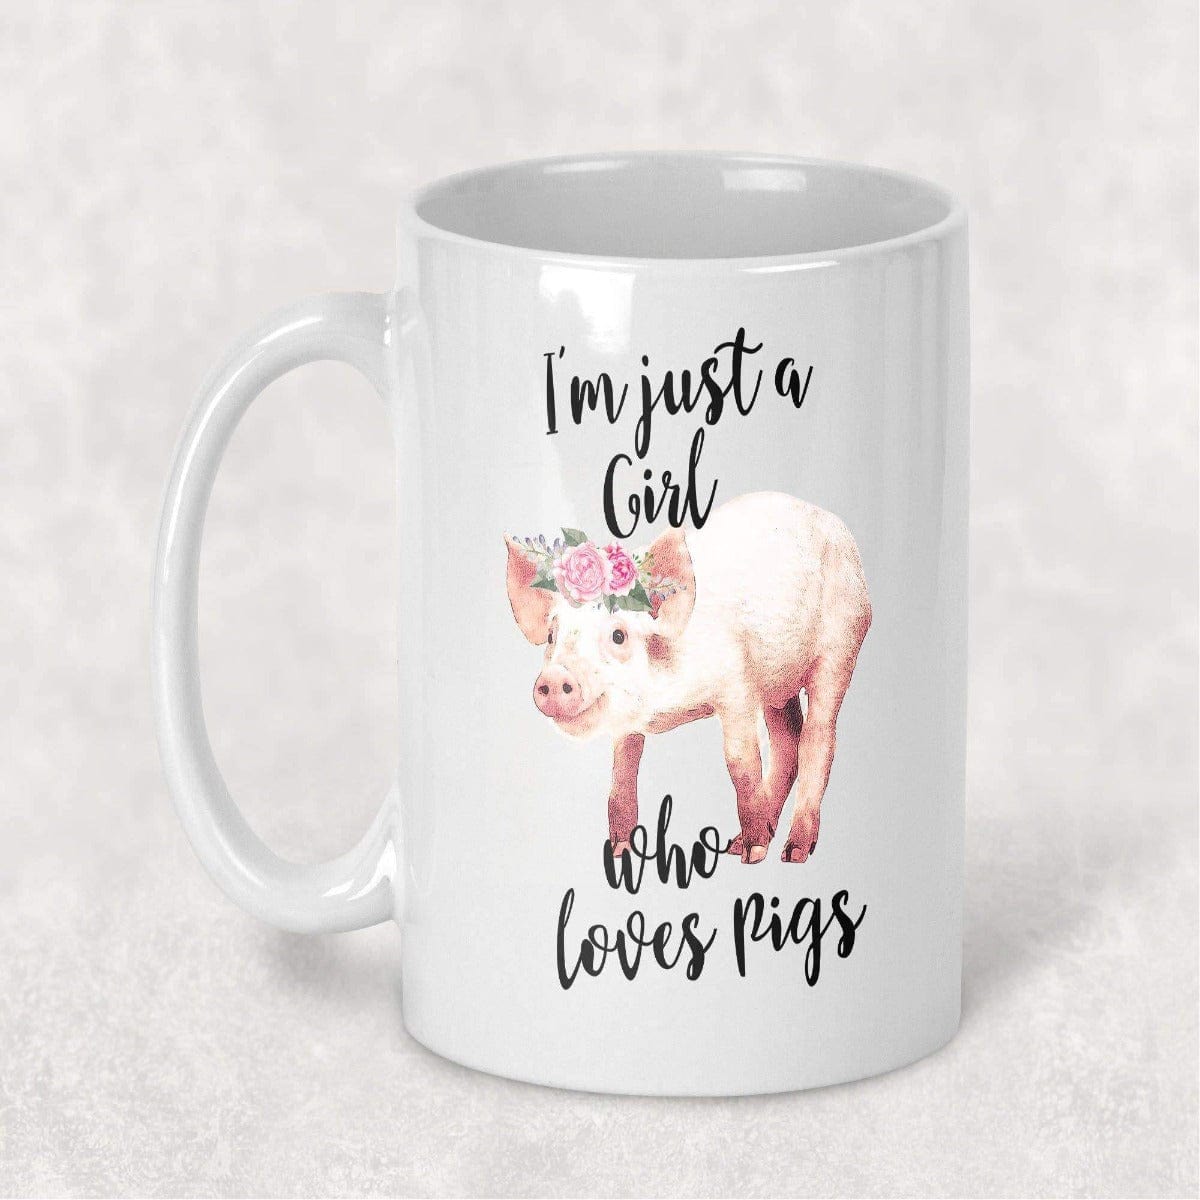 I'm Just a Girl Who Loves Pigs Cute Coffee Mug for Pig Lovers! - The Pink Pigs, A Compassionate Boutique